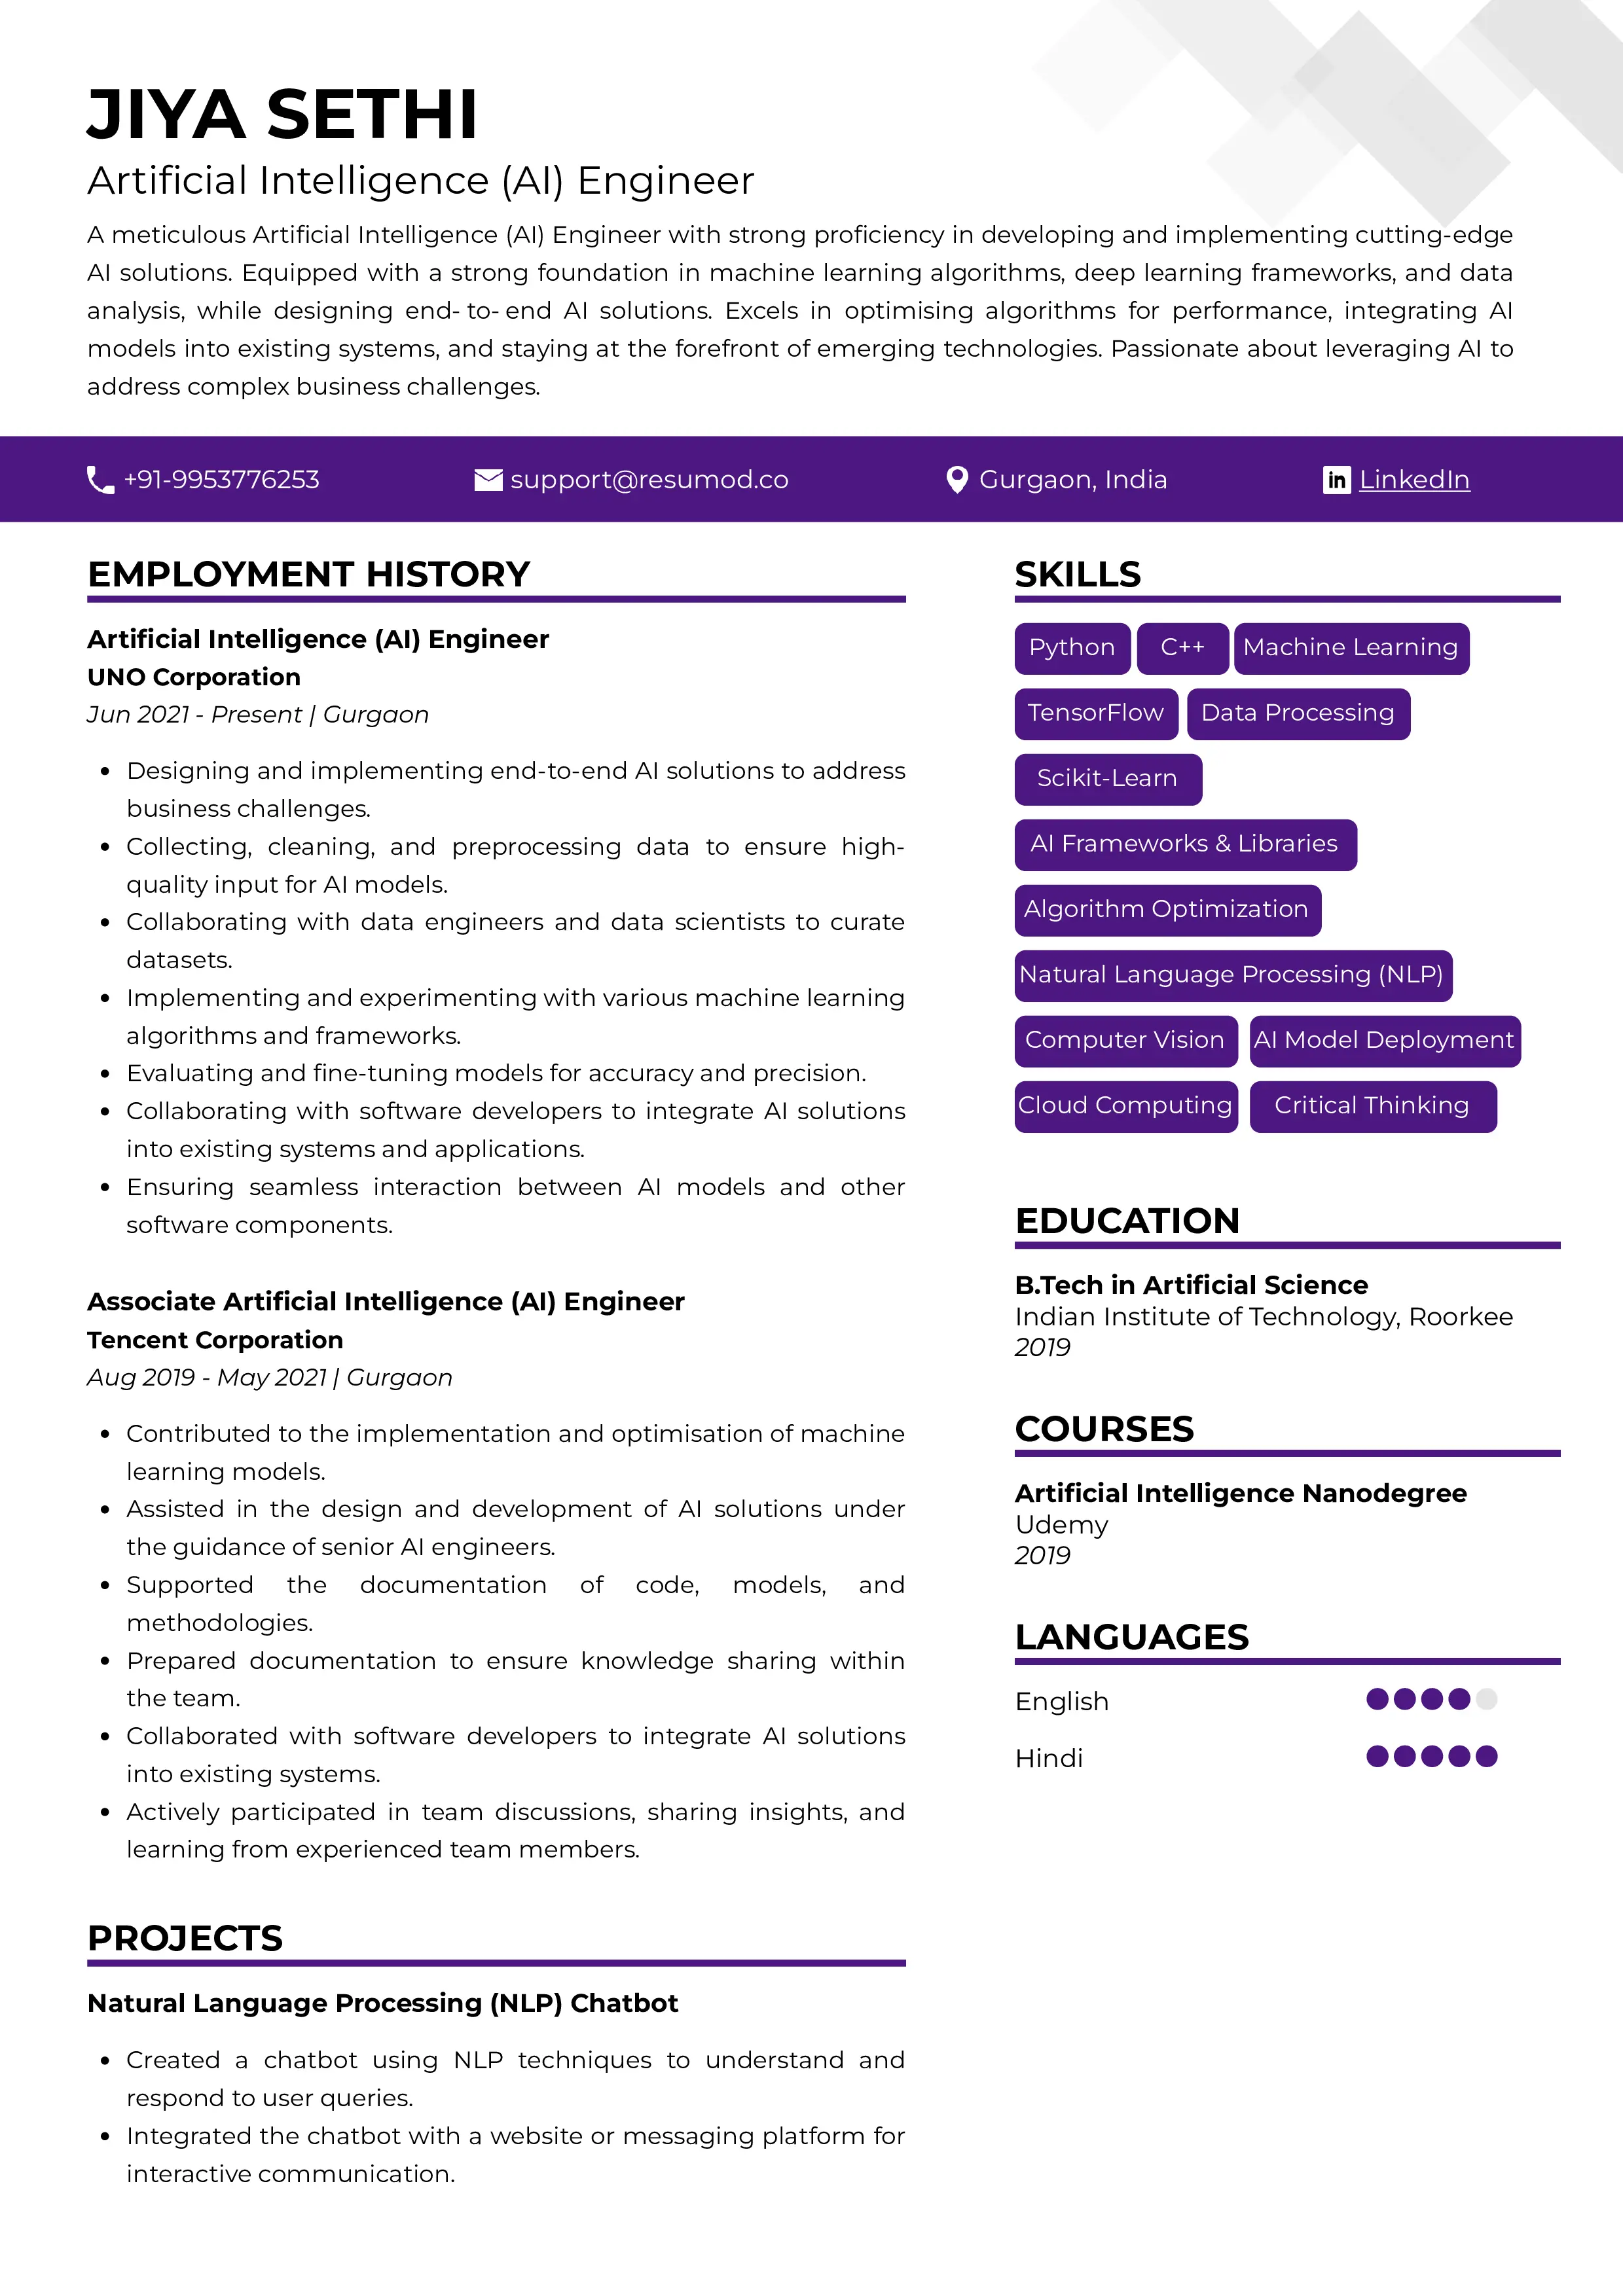 Sample Resume of Artificial Intelligence Engineer | Free Resume Templates & Samples on Resumod.co